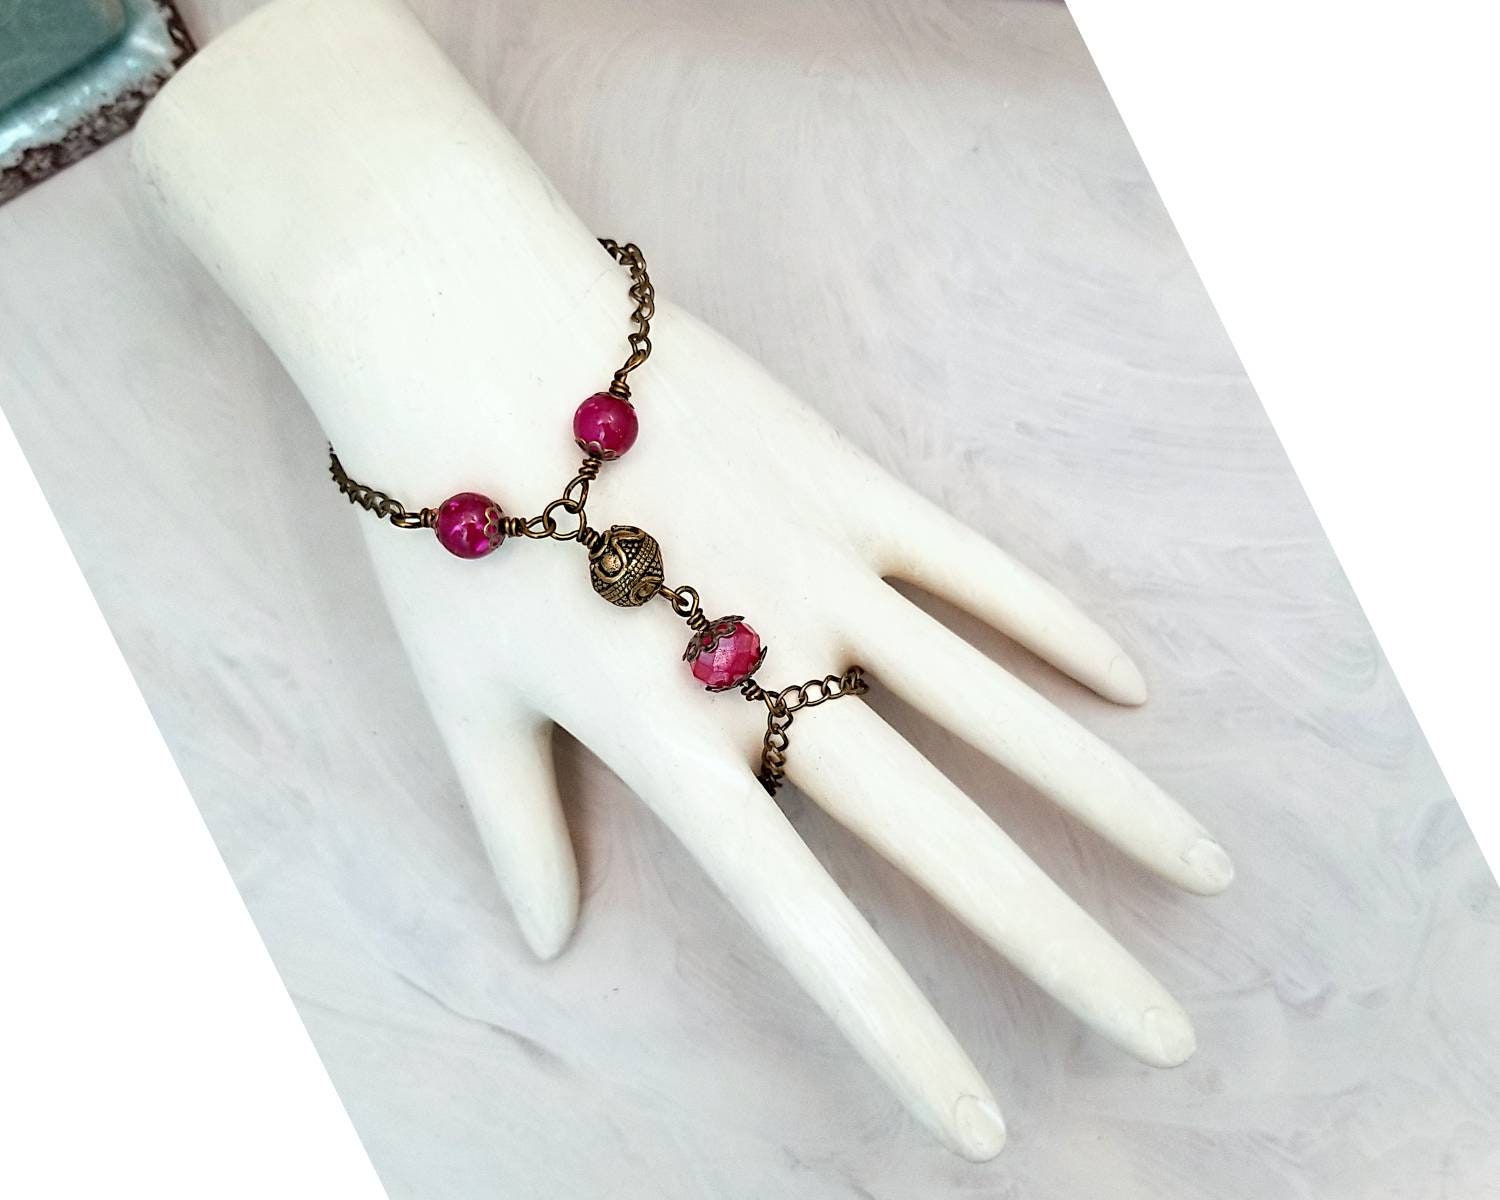 Wire Wrapped Hand Flower Bracelet in Pink, Boho, Bohemian, Gypsy, Wedding, Bridesmaid, Renaissance, Medieval, Choice of Colors and Metals